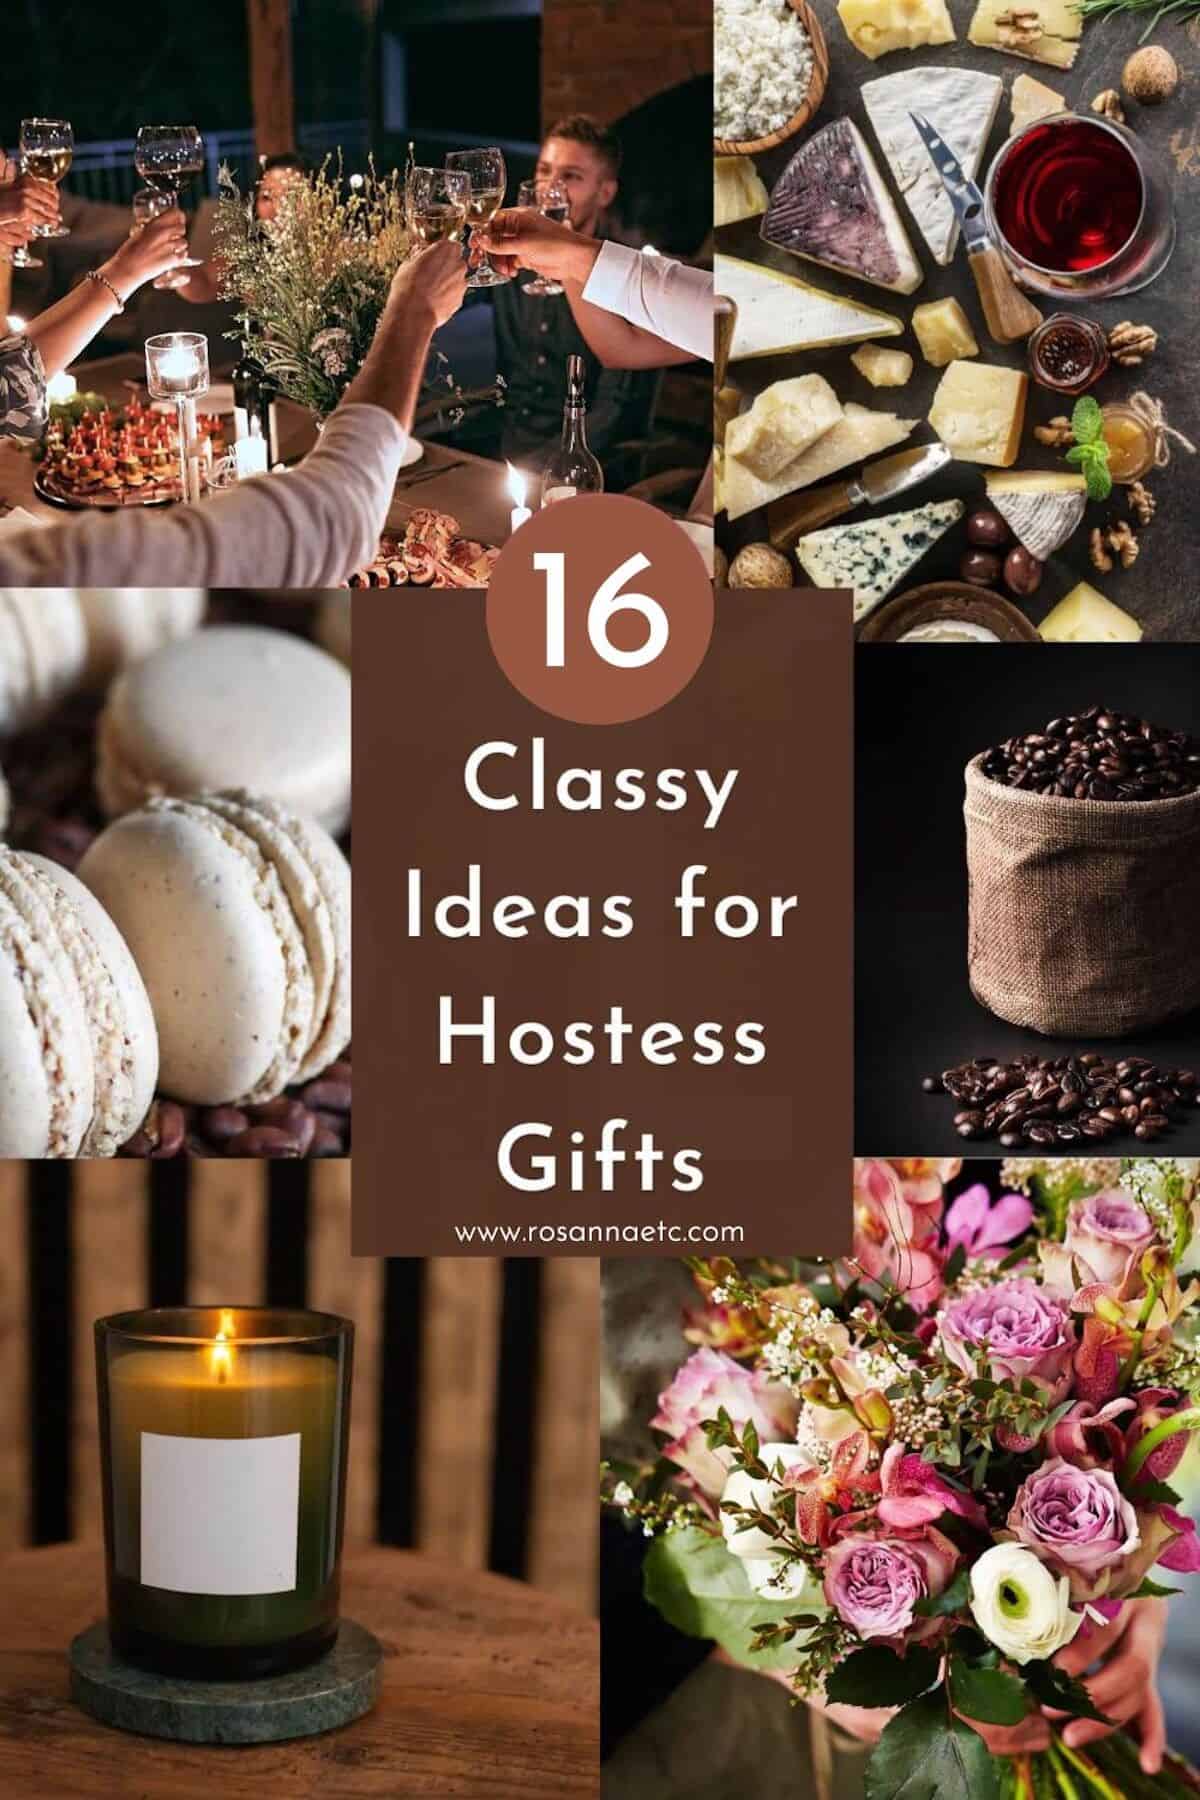 Classy ideas for hostess gifts.